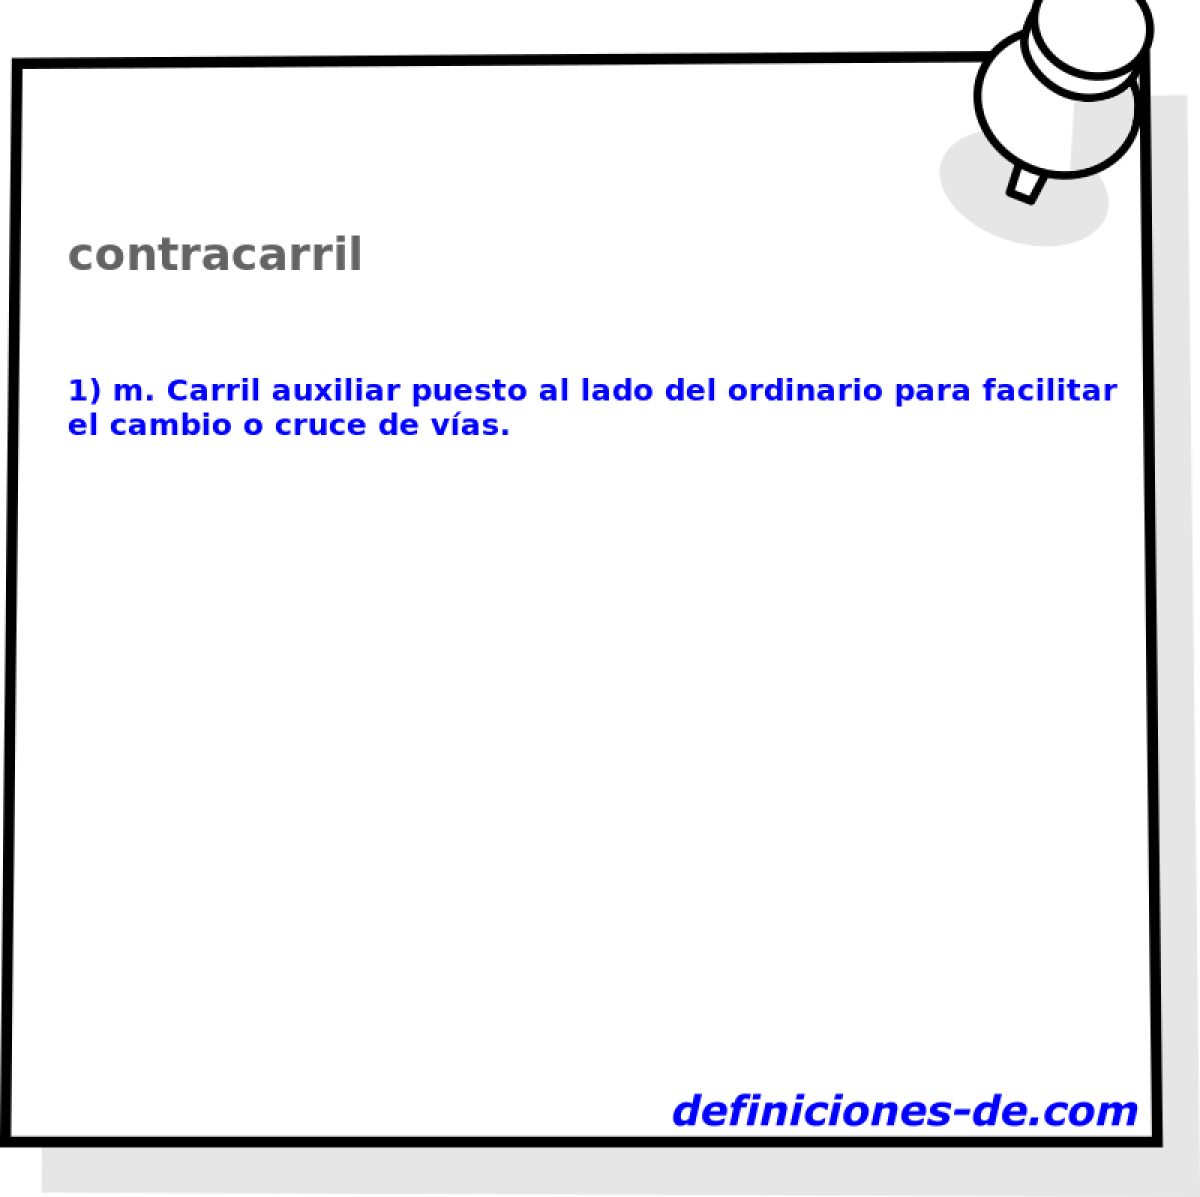 contracarril 